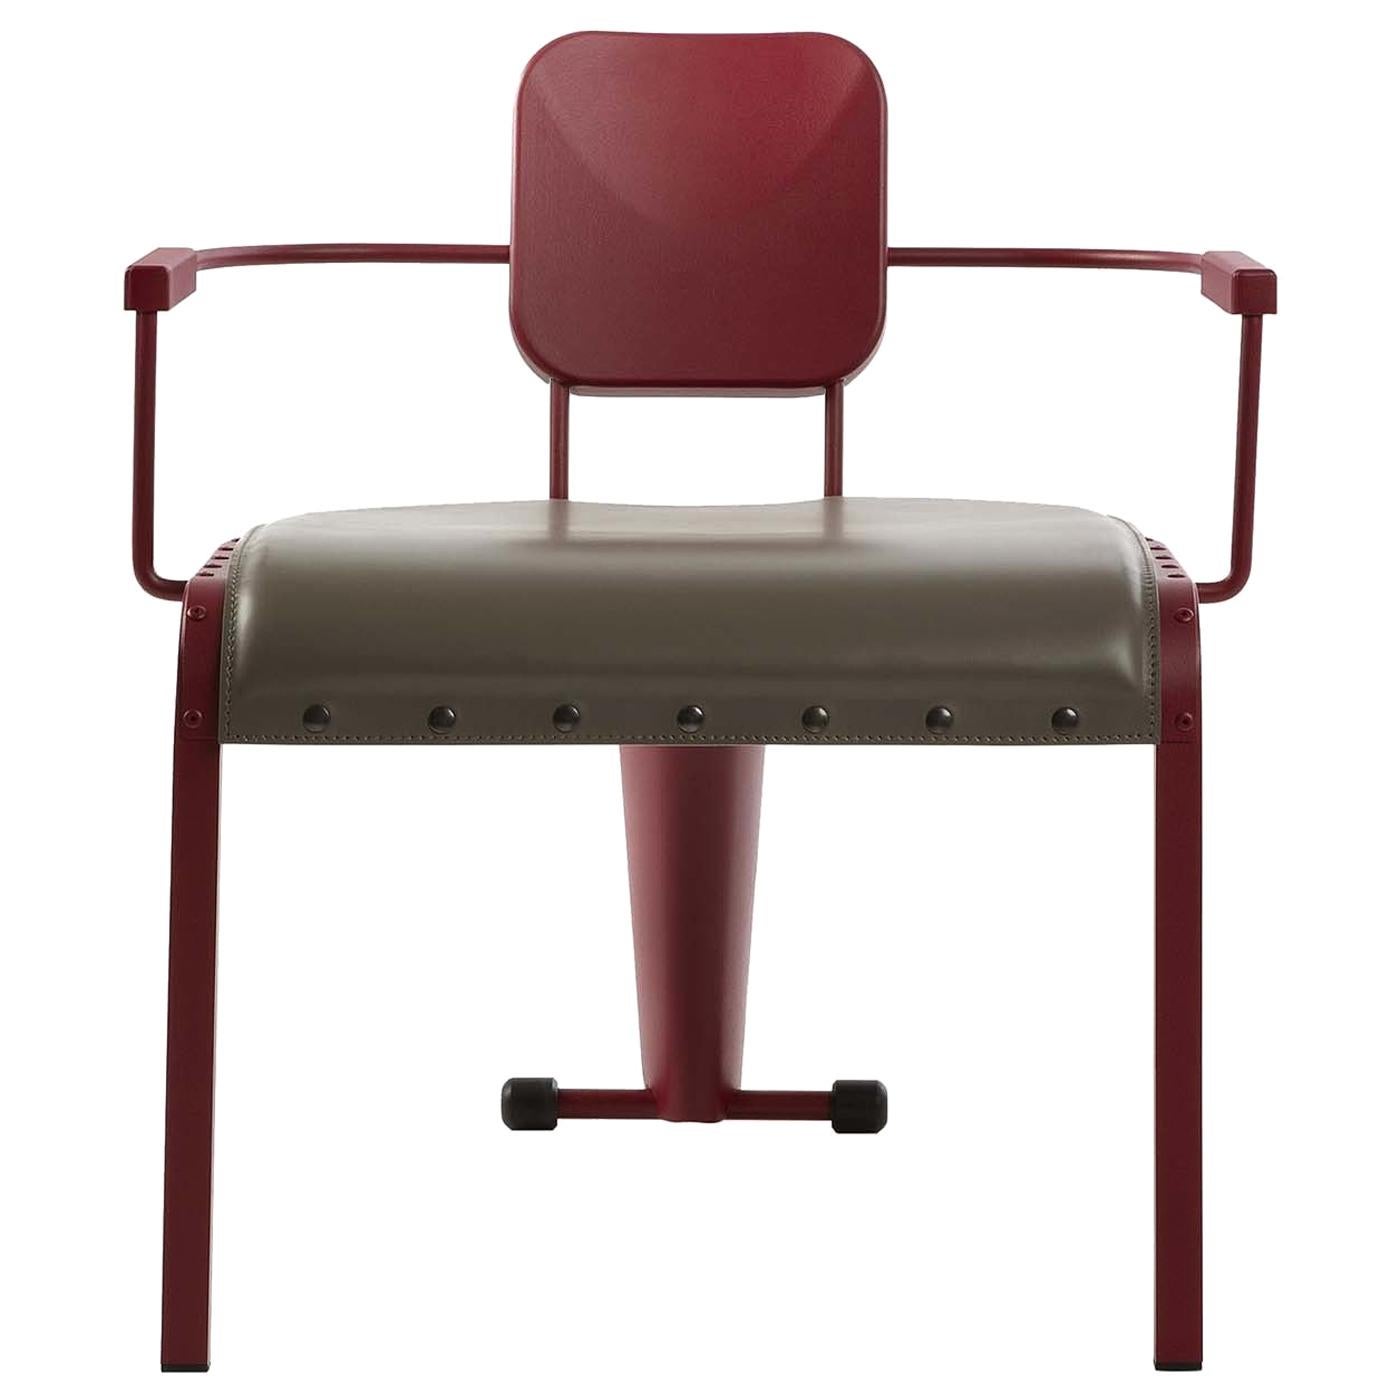 Rock Red Lounge Chair with Gray Leather Seat by Marc Sadler